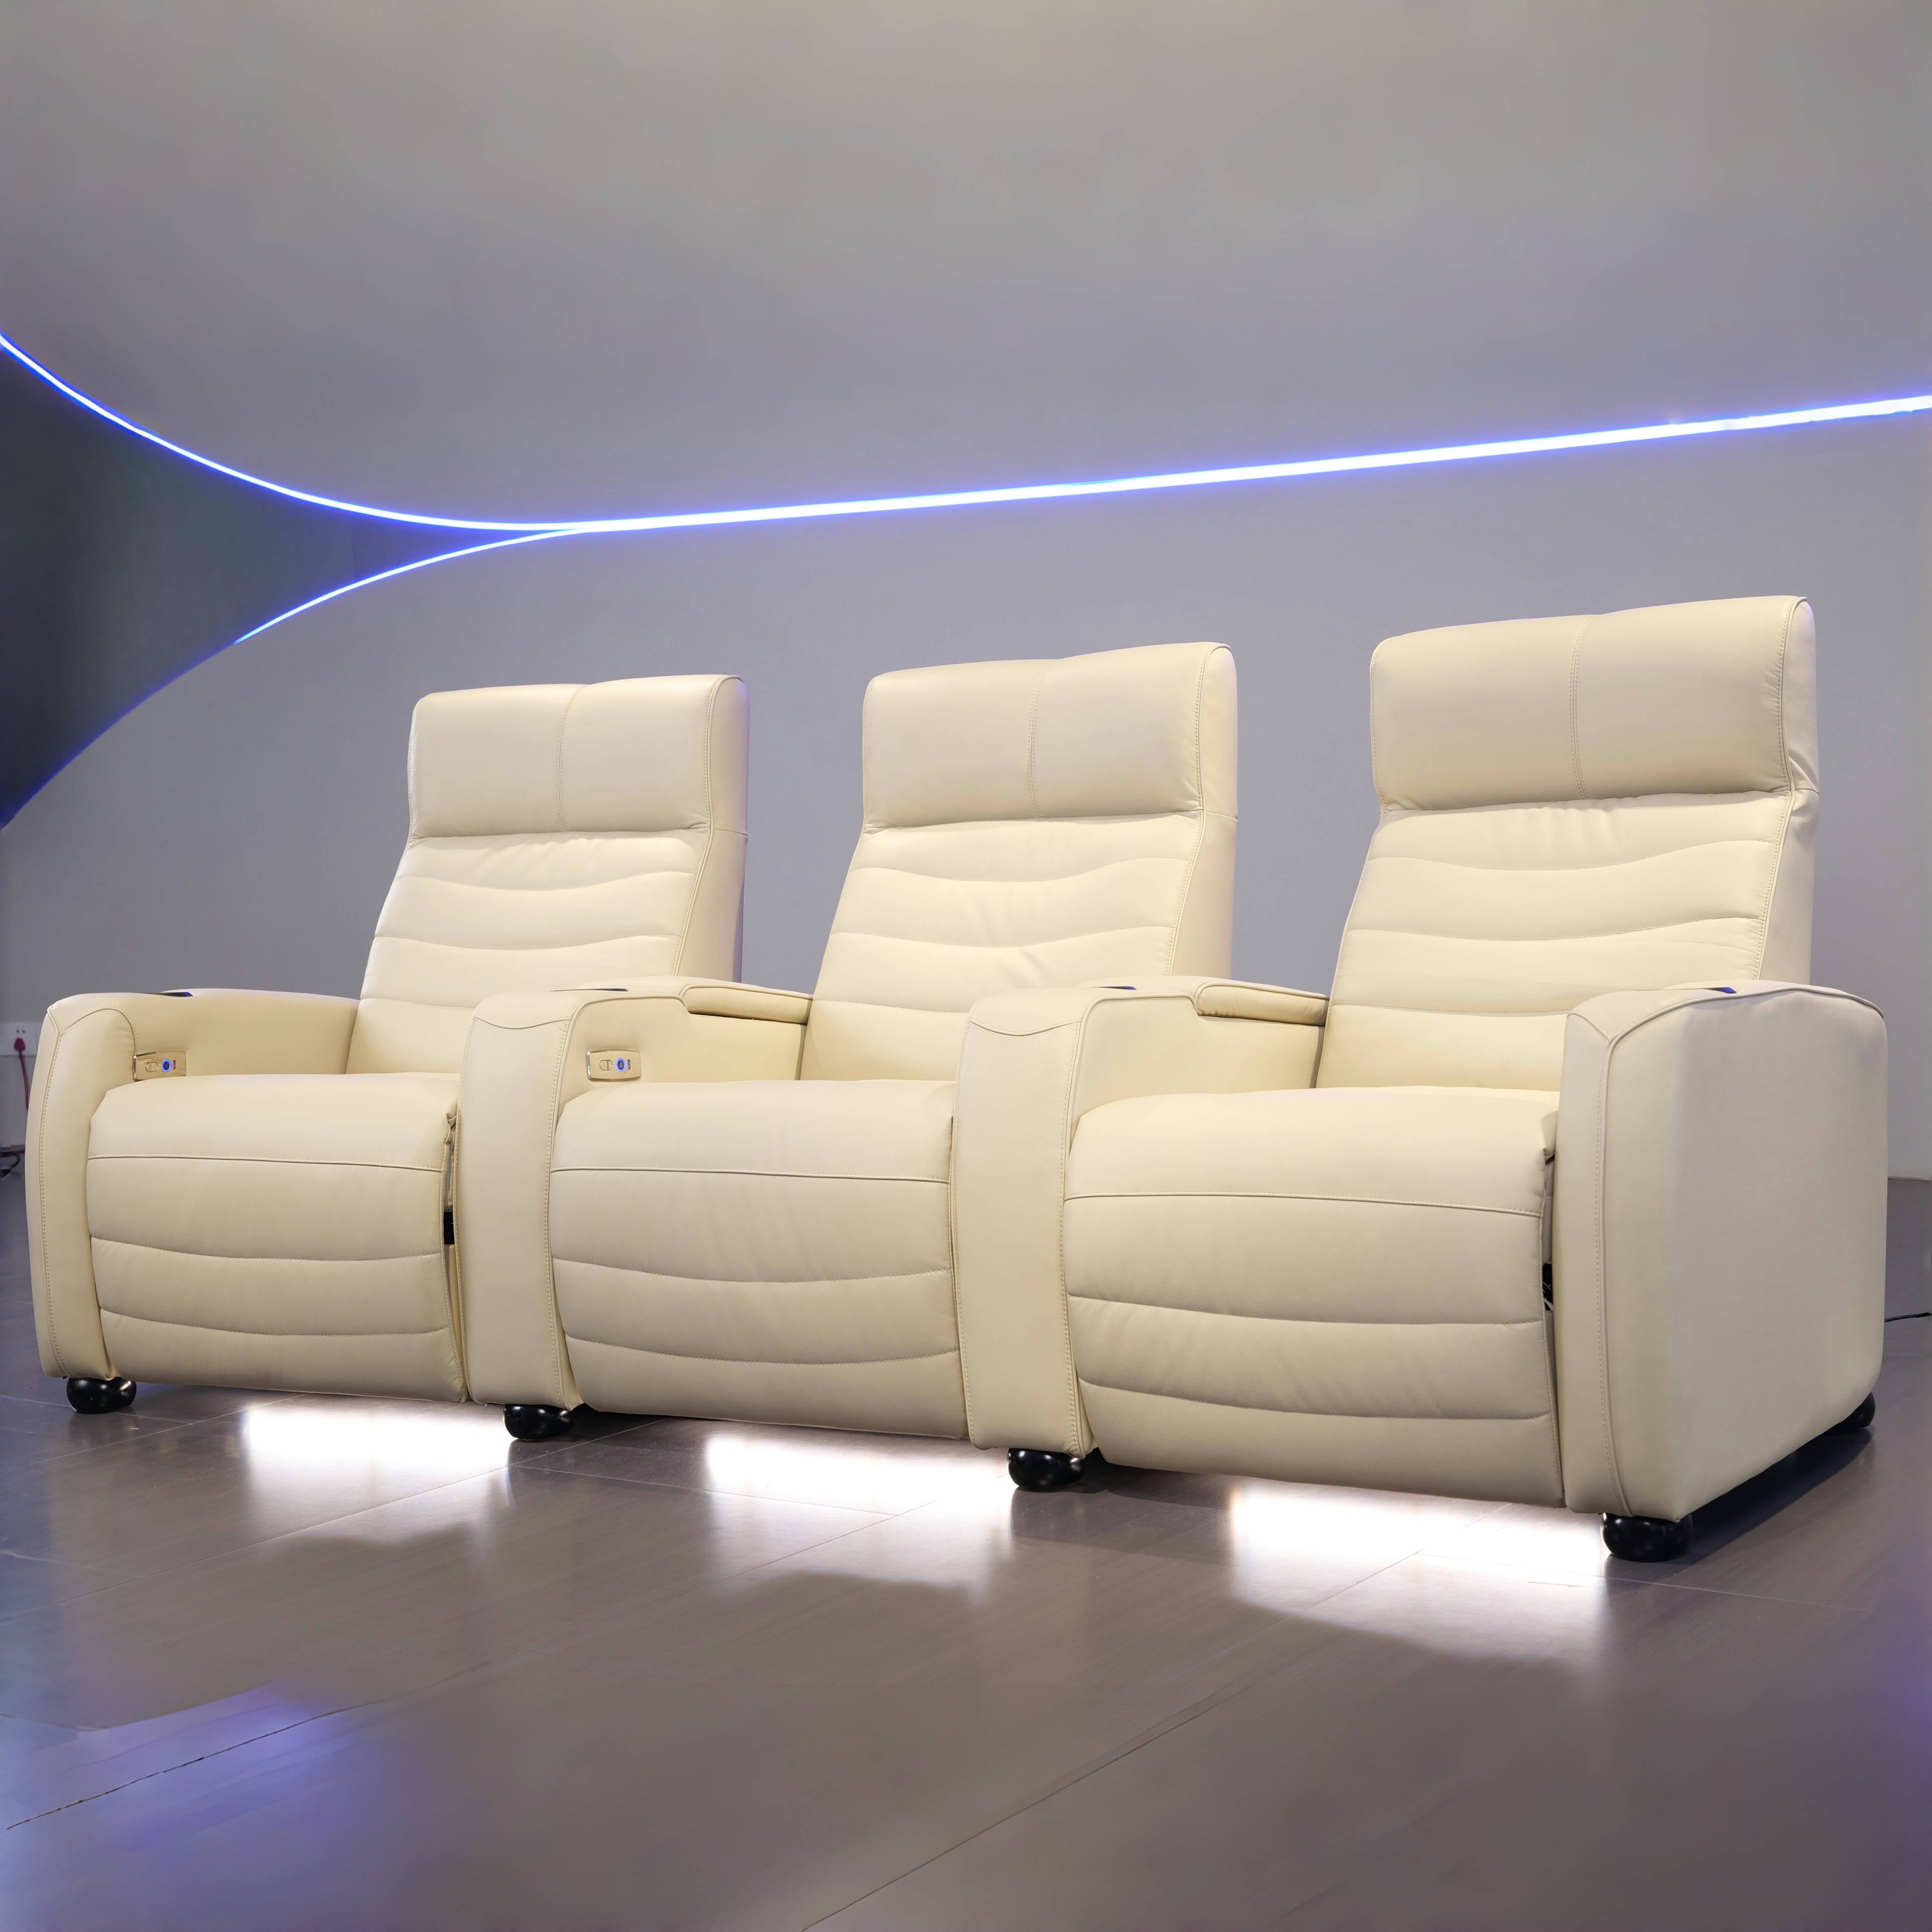 Villa Home cinema sofa in basement private video room electric seats deluxe features oxygen pods